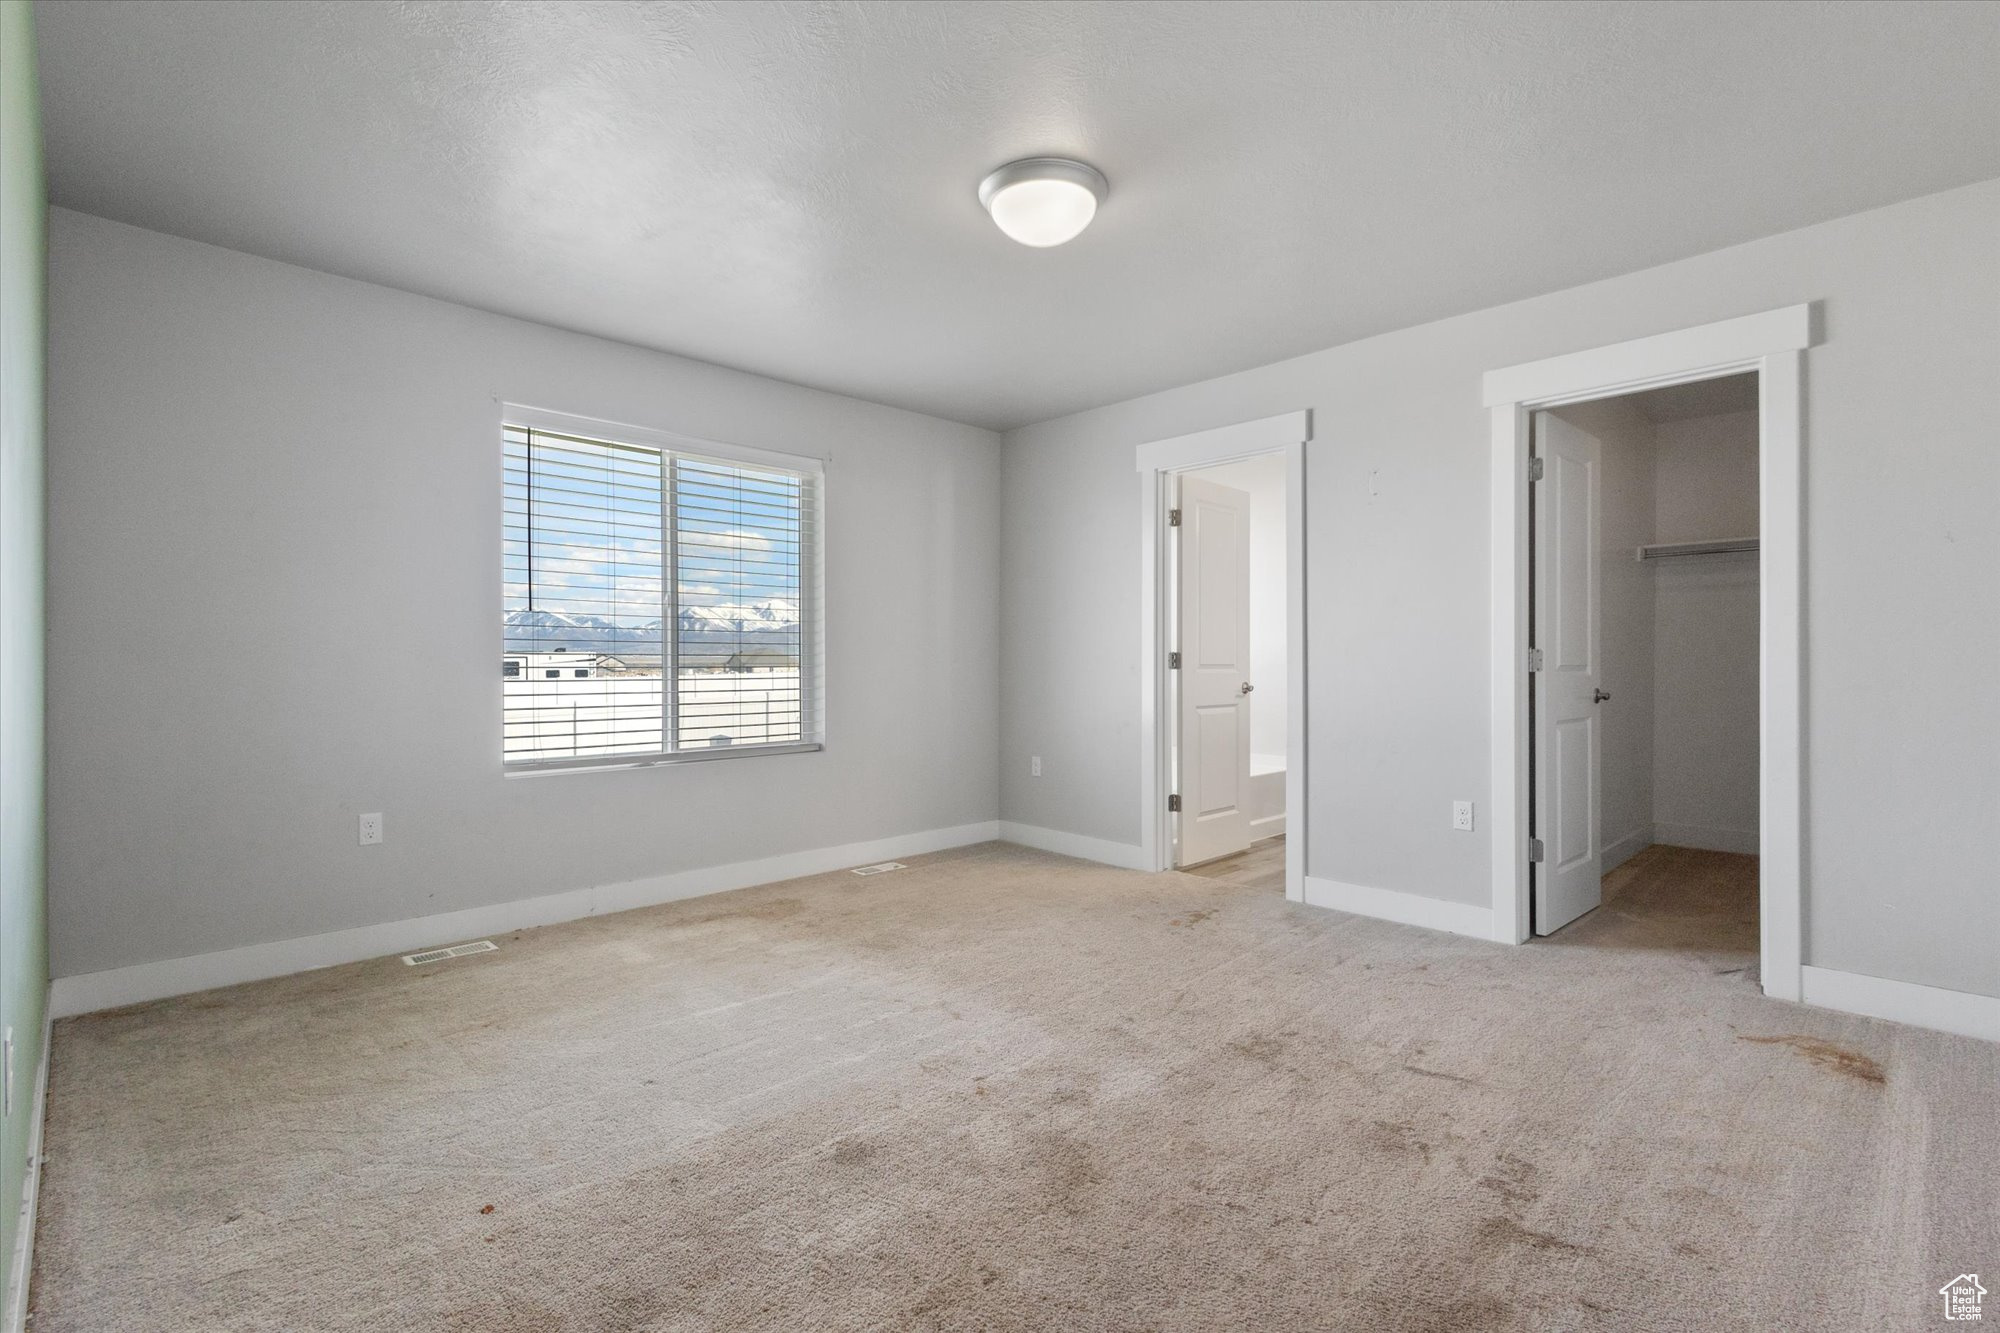 Unfurnished bedroom featuring light carpet, a closet, a walk in closet, and ensuite bathroom